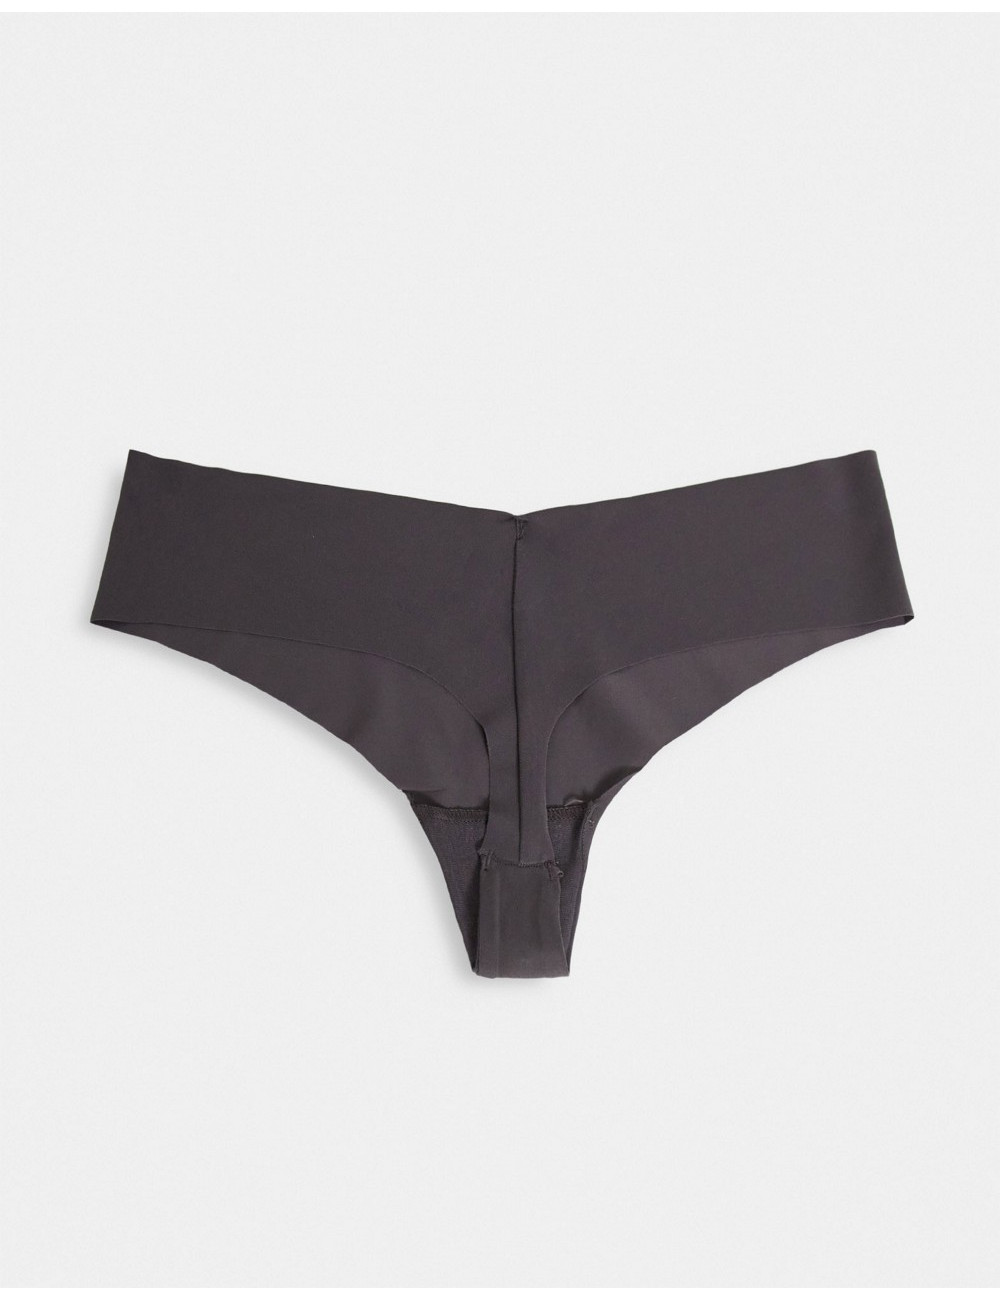 Aerie no show 2 pack thong...